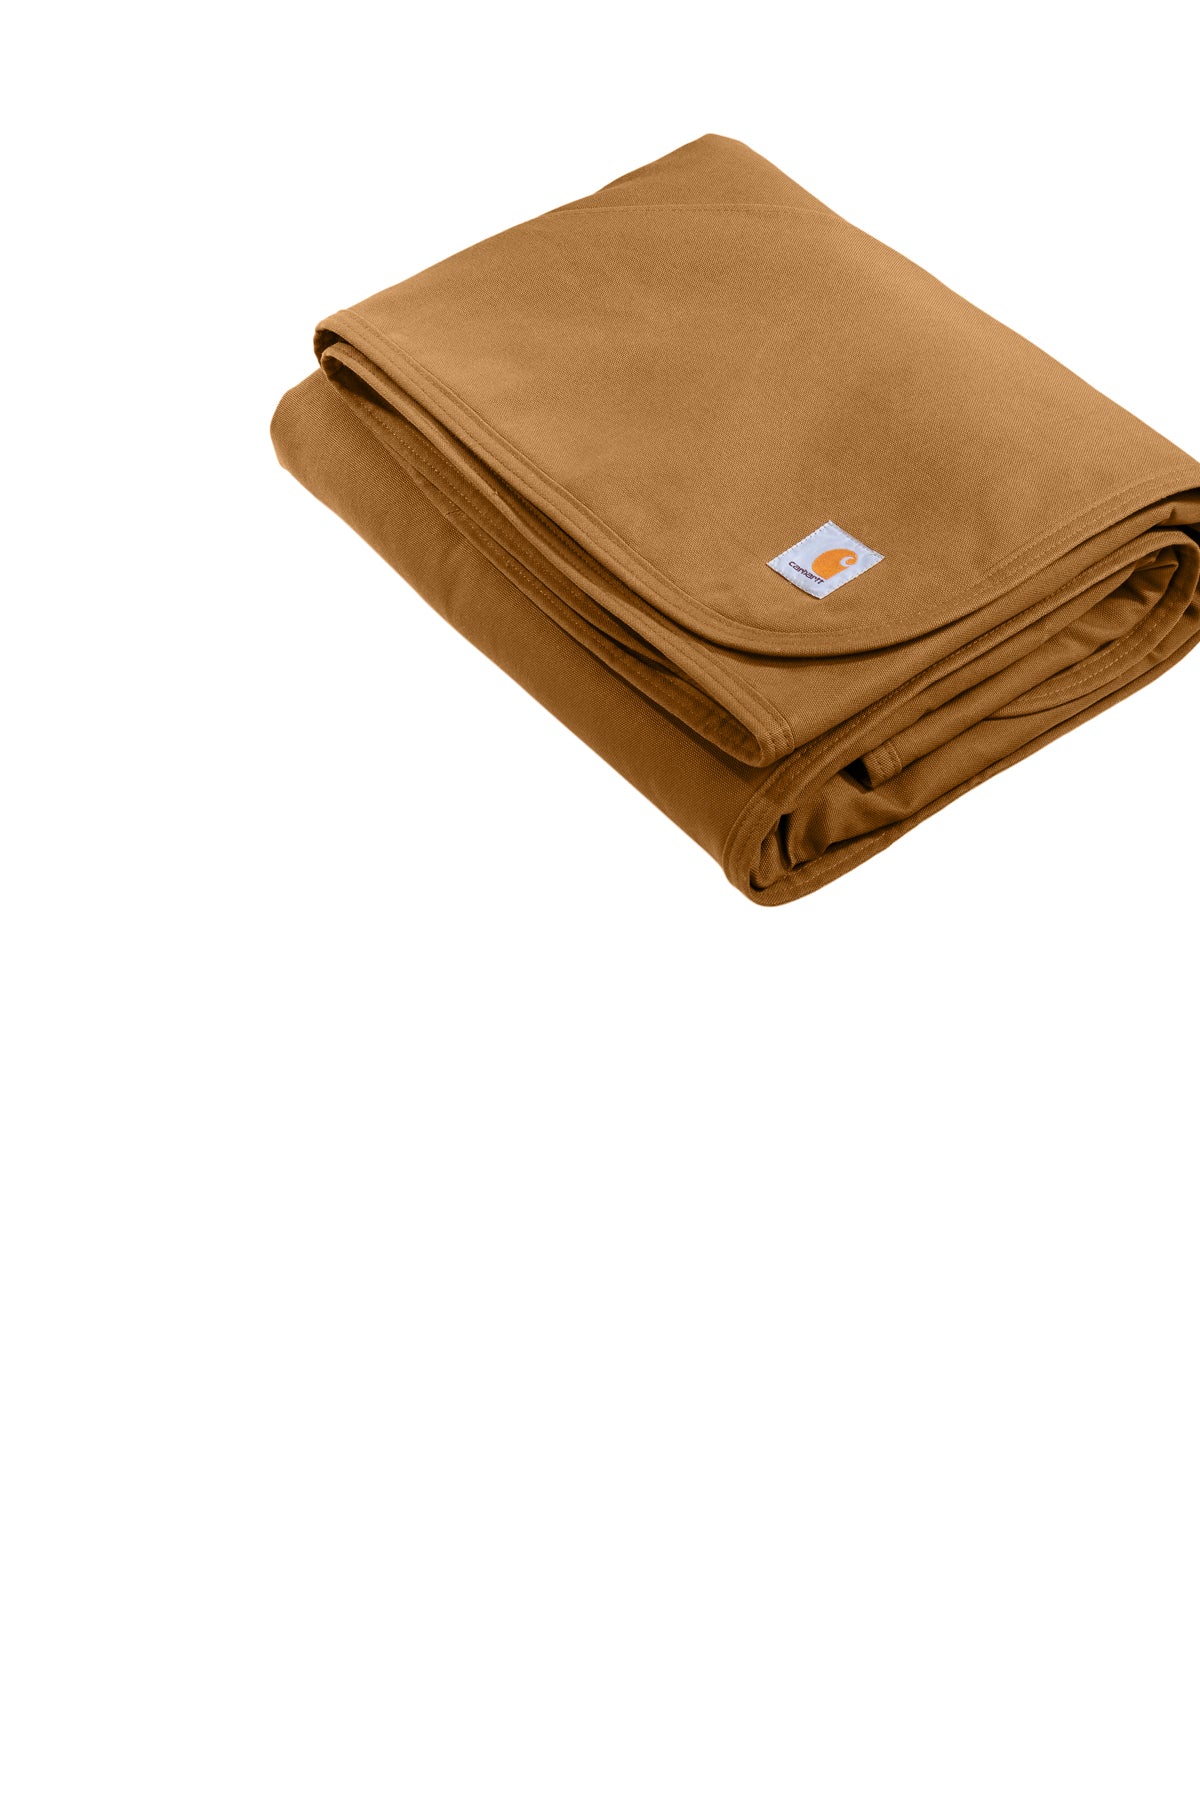 CTP0000502 Carhartt ® Firm Duck Sherpa-Lined Blanket